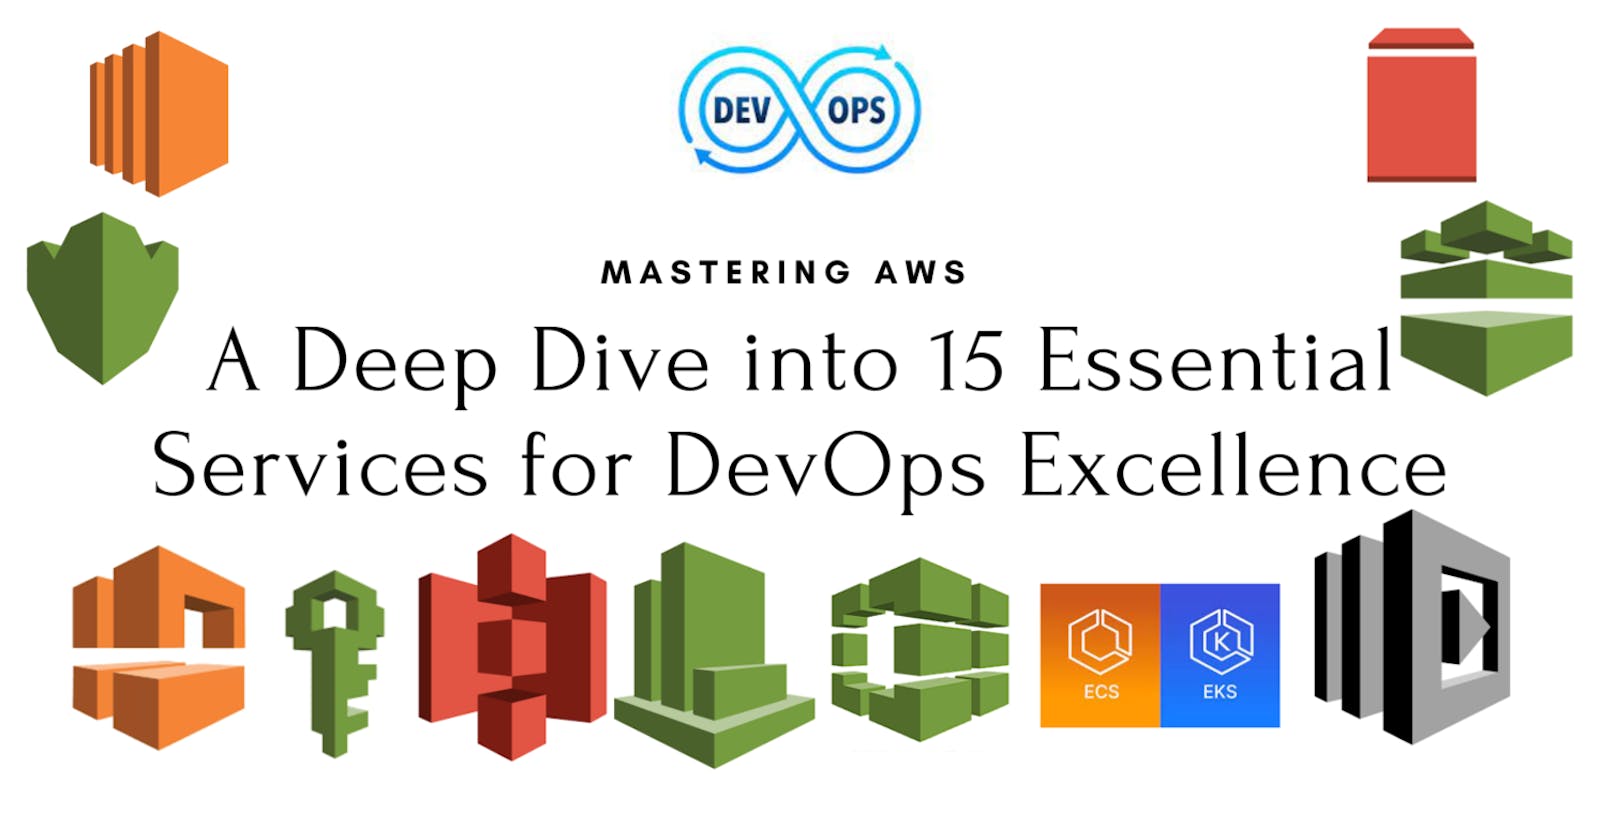 Mastering AWS: A Deep Dive into 15 Essential Services for DevOps Excellence (Day - 10)